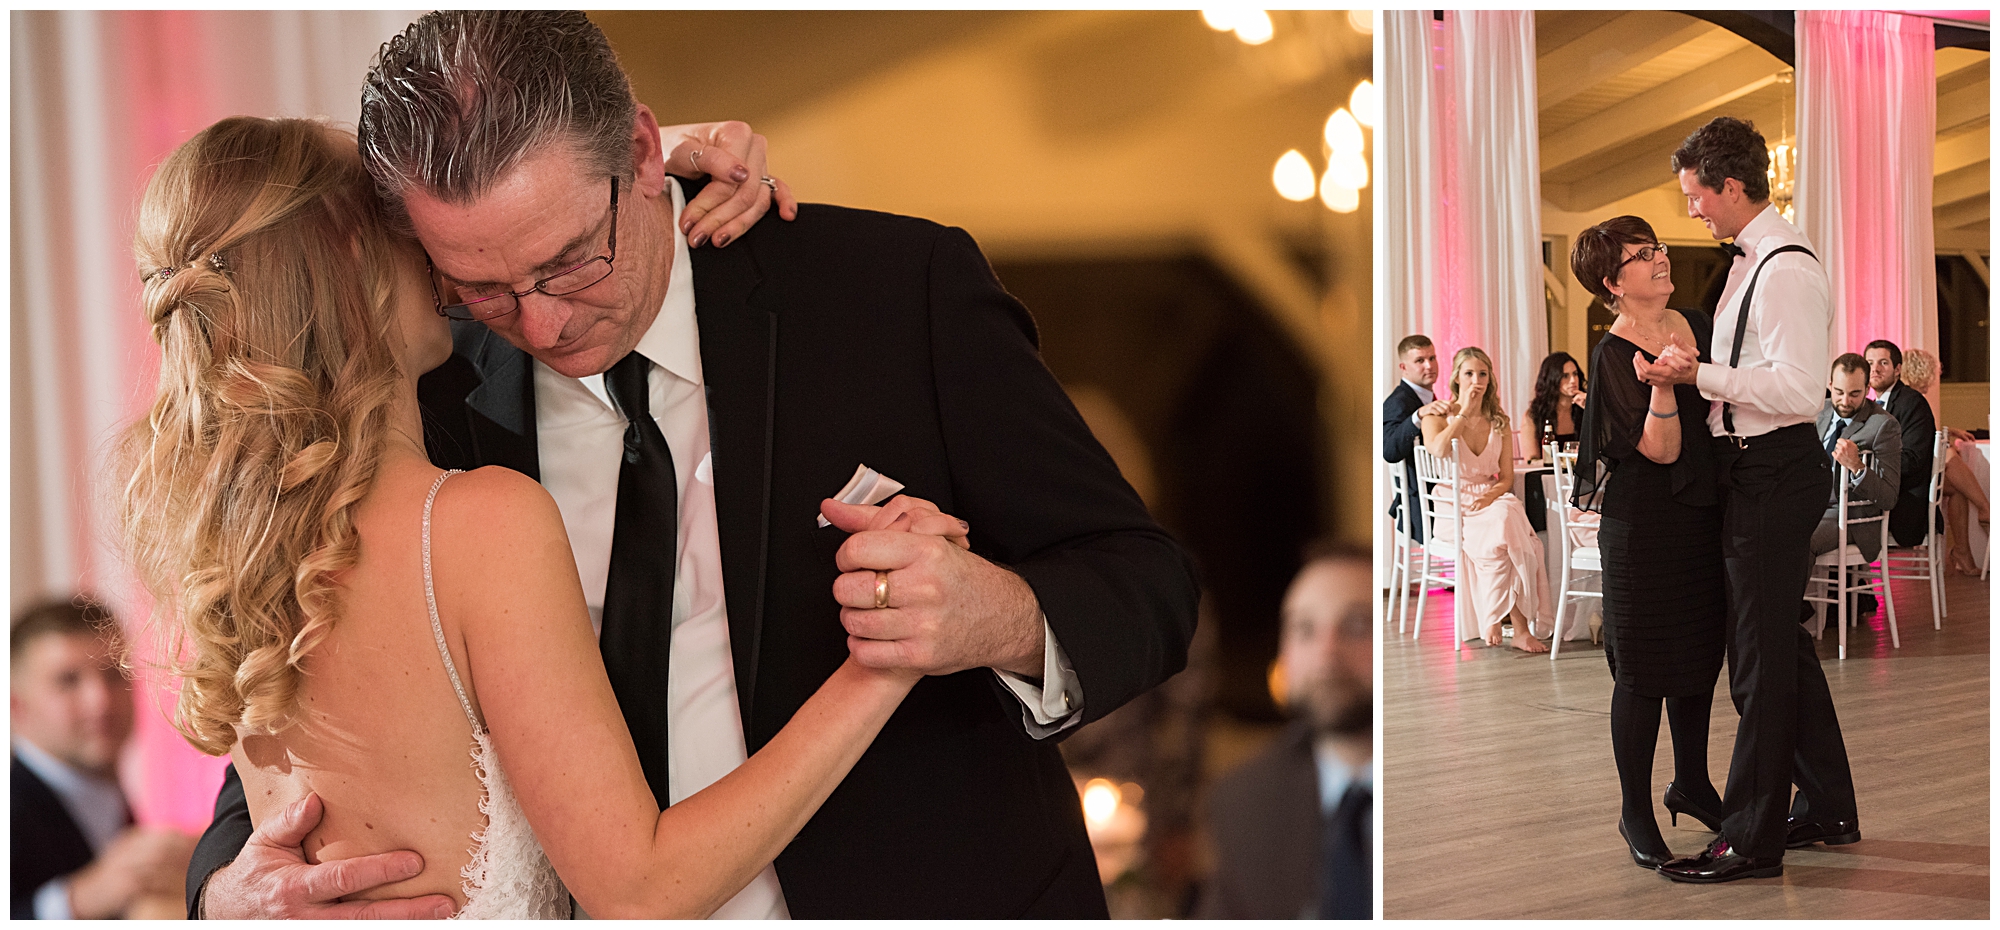 A bride and groom share a dance with their parents at Belle Mer - a Longwood Venue in Newport RI.